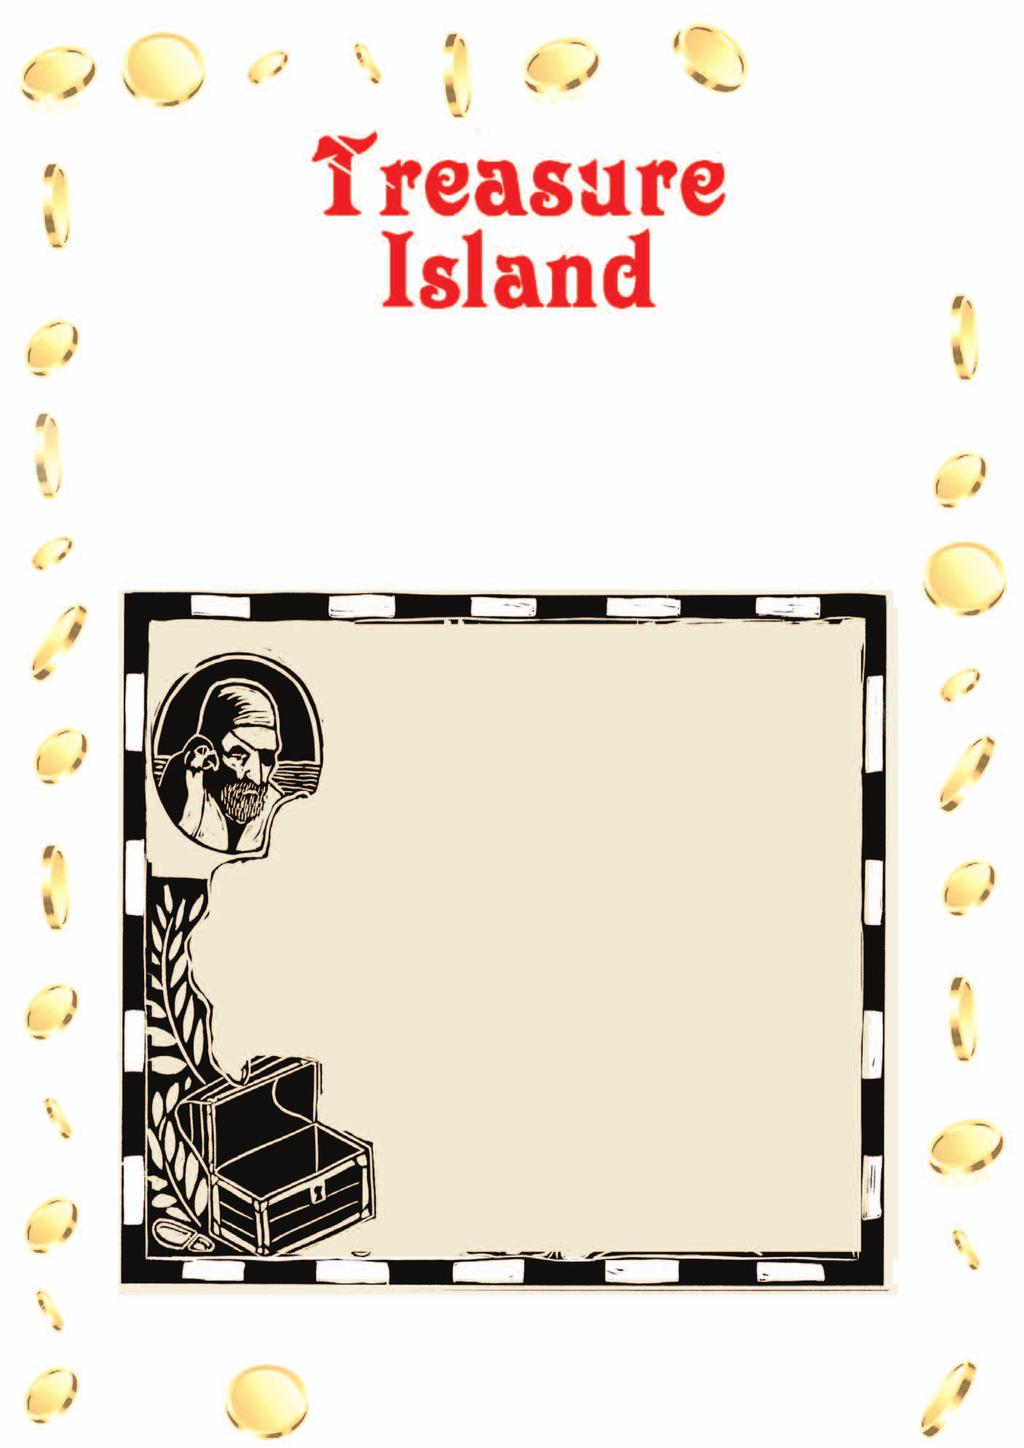 Names The pirates in Treasure Island have wonderfully descriptive names Billy Bones Long John Silver Blind Pew Captain Flint Have a go at making up your own pirate name and